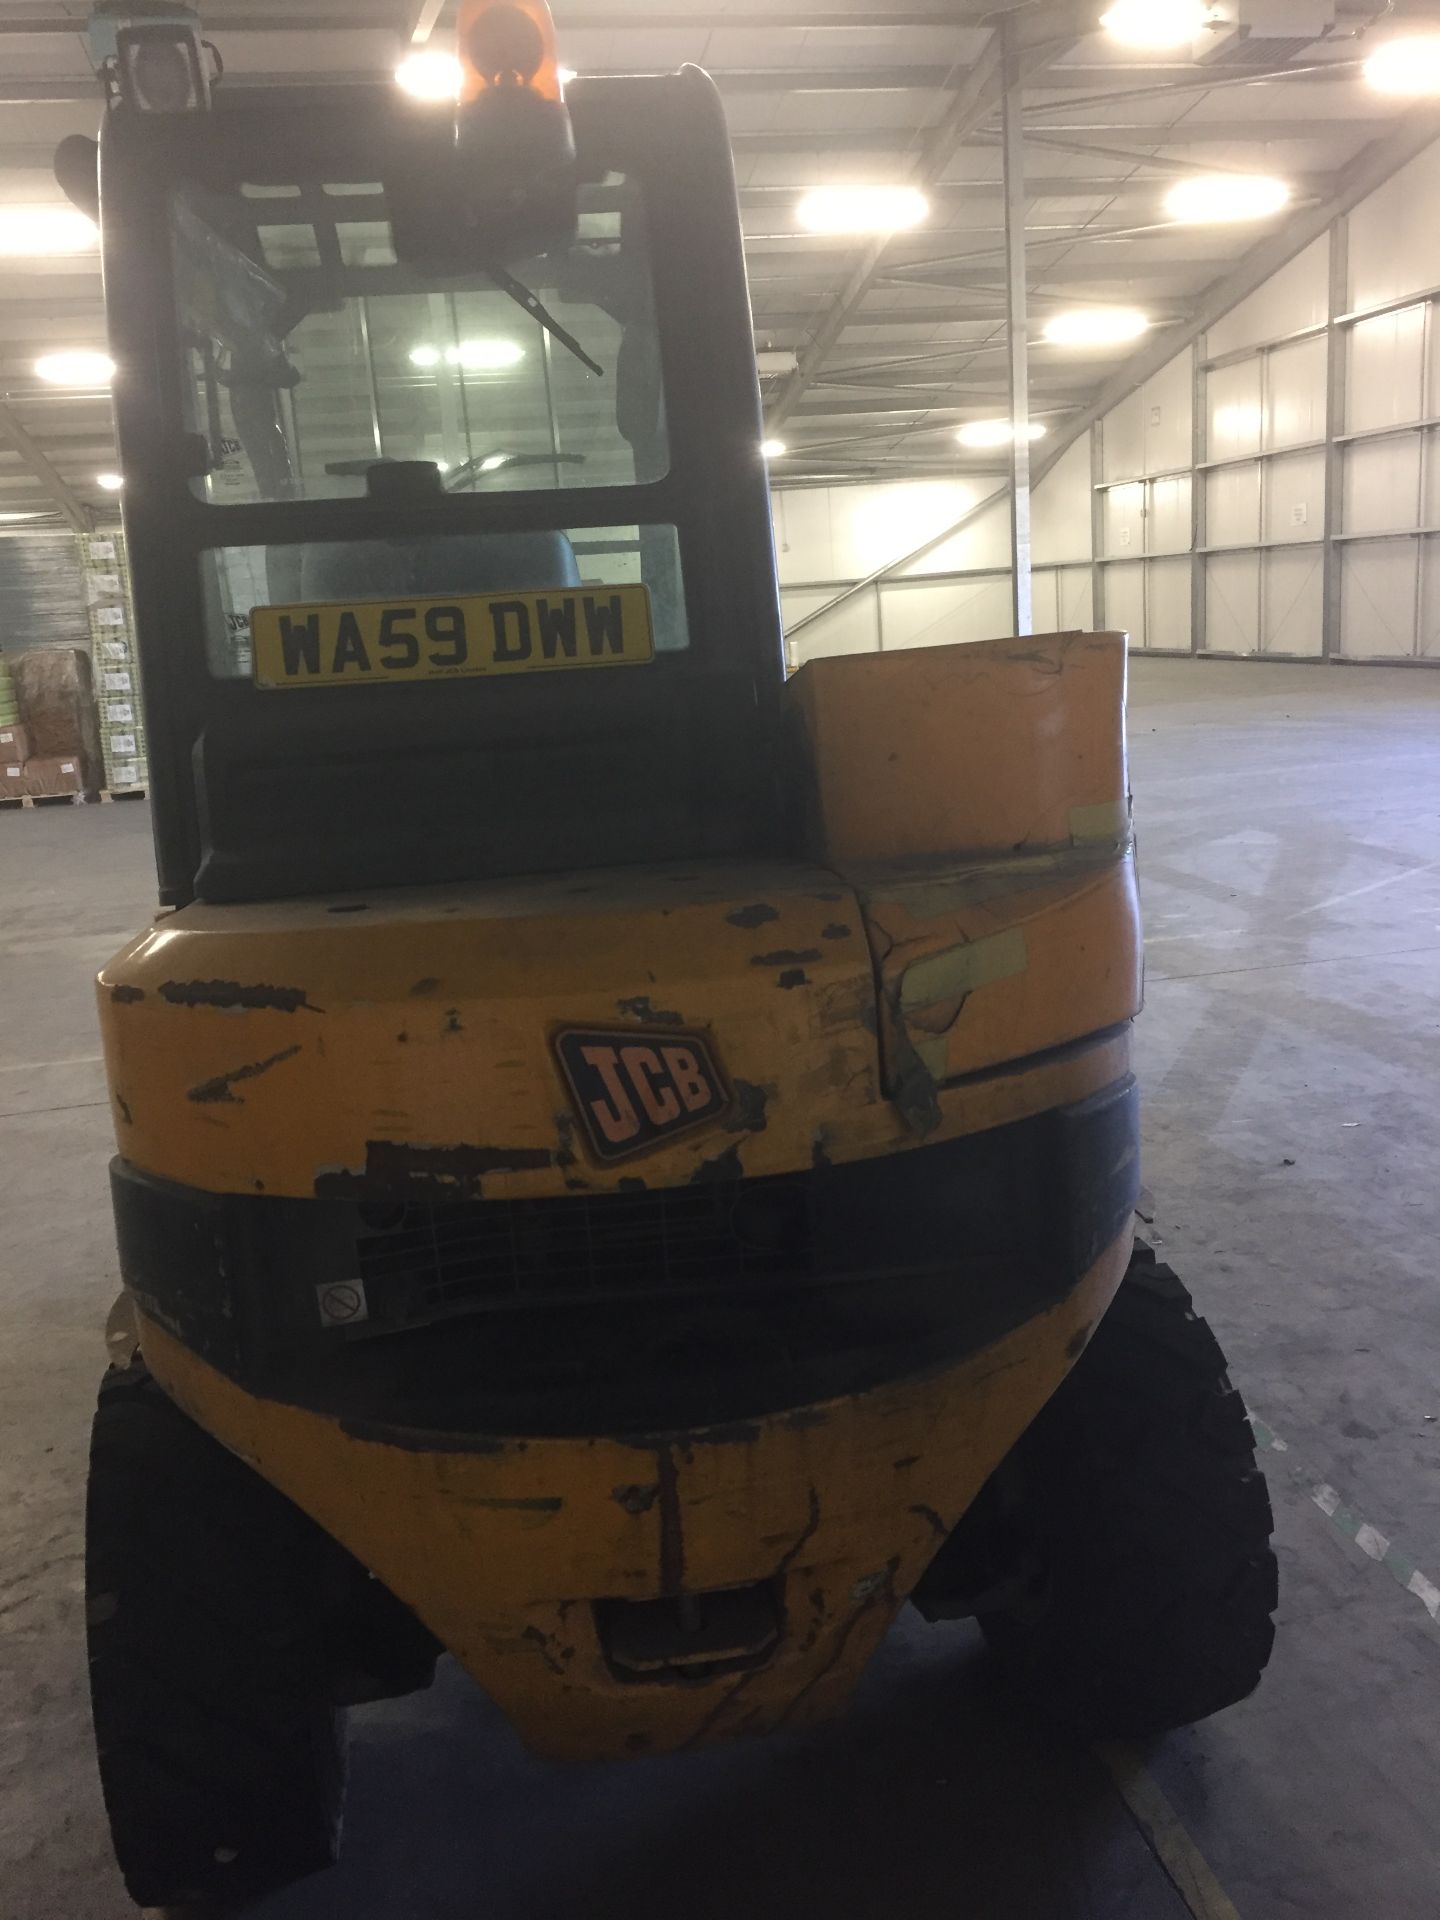 JCB Teletruk TLT 30D 4 x 4 telescopic fork lift truck, Serial No. 943984S (2009) Hours: 4,361 with - Image 3 of 7